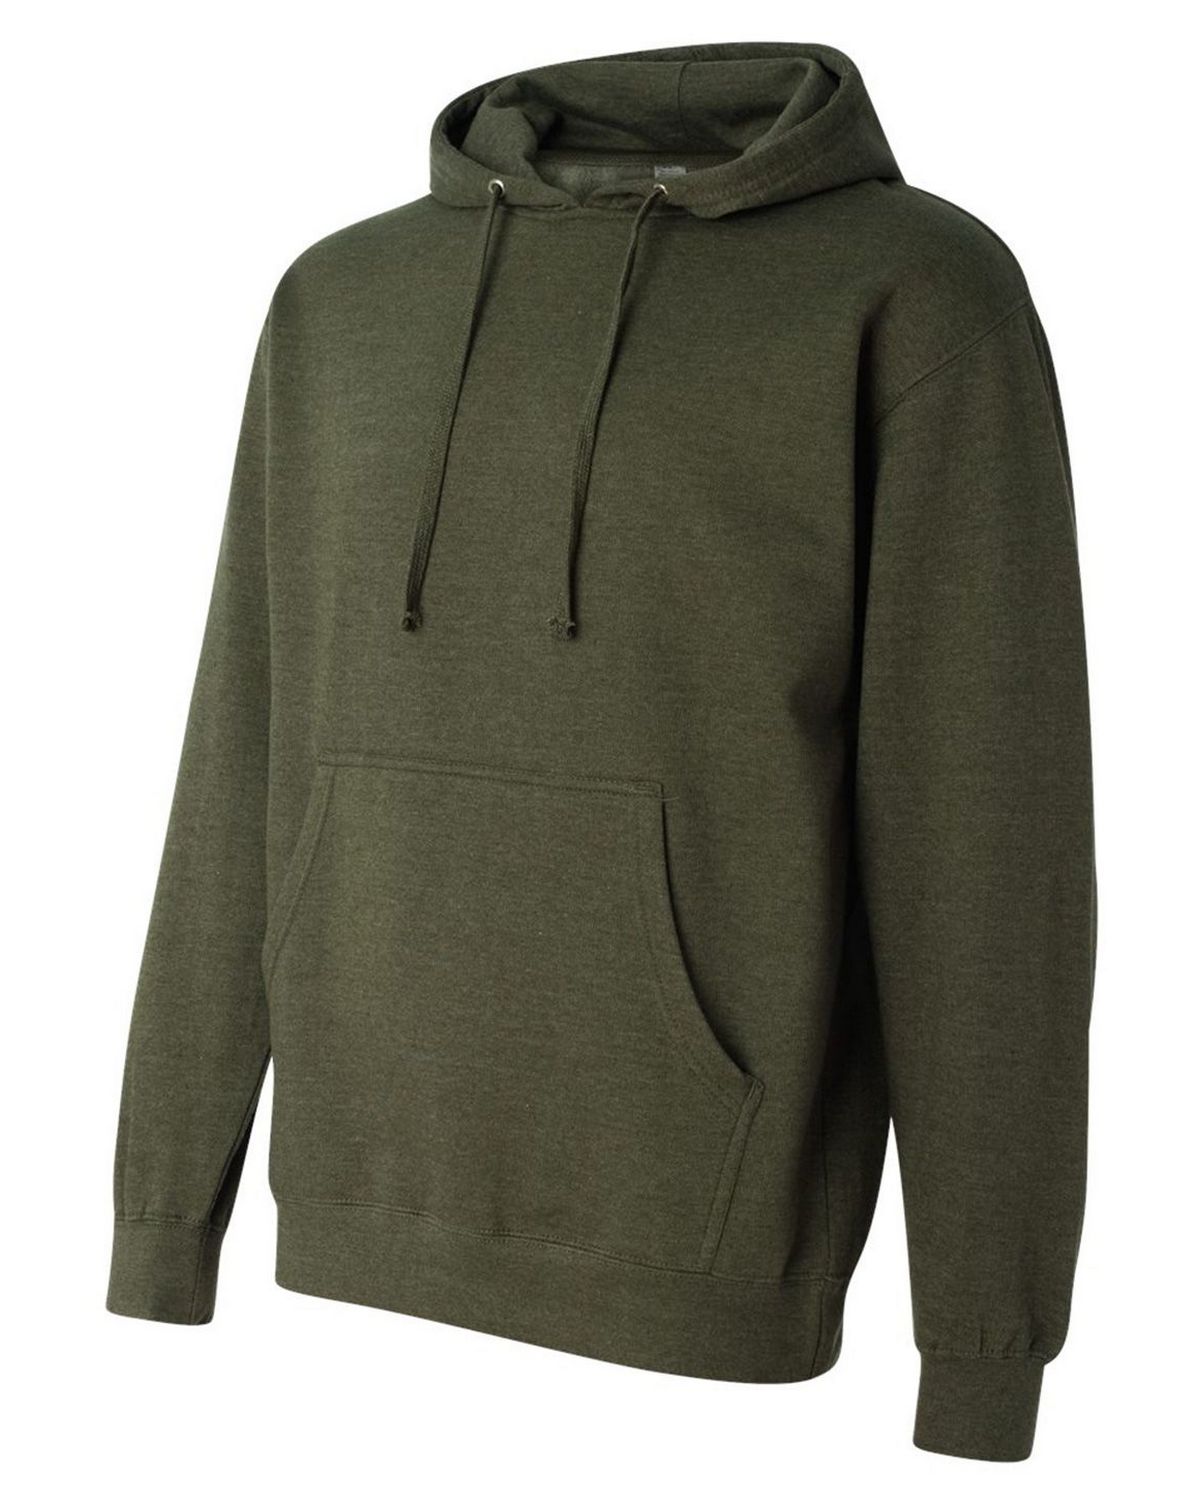 Independent Trading Co. SS4500 Mens Midweight Hooded Pullover Sweatshirt